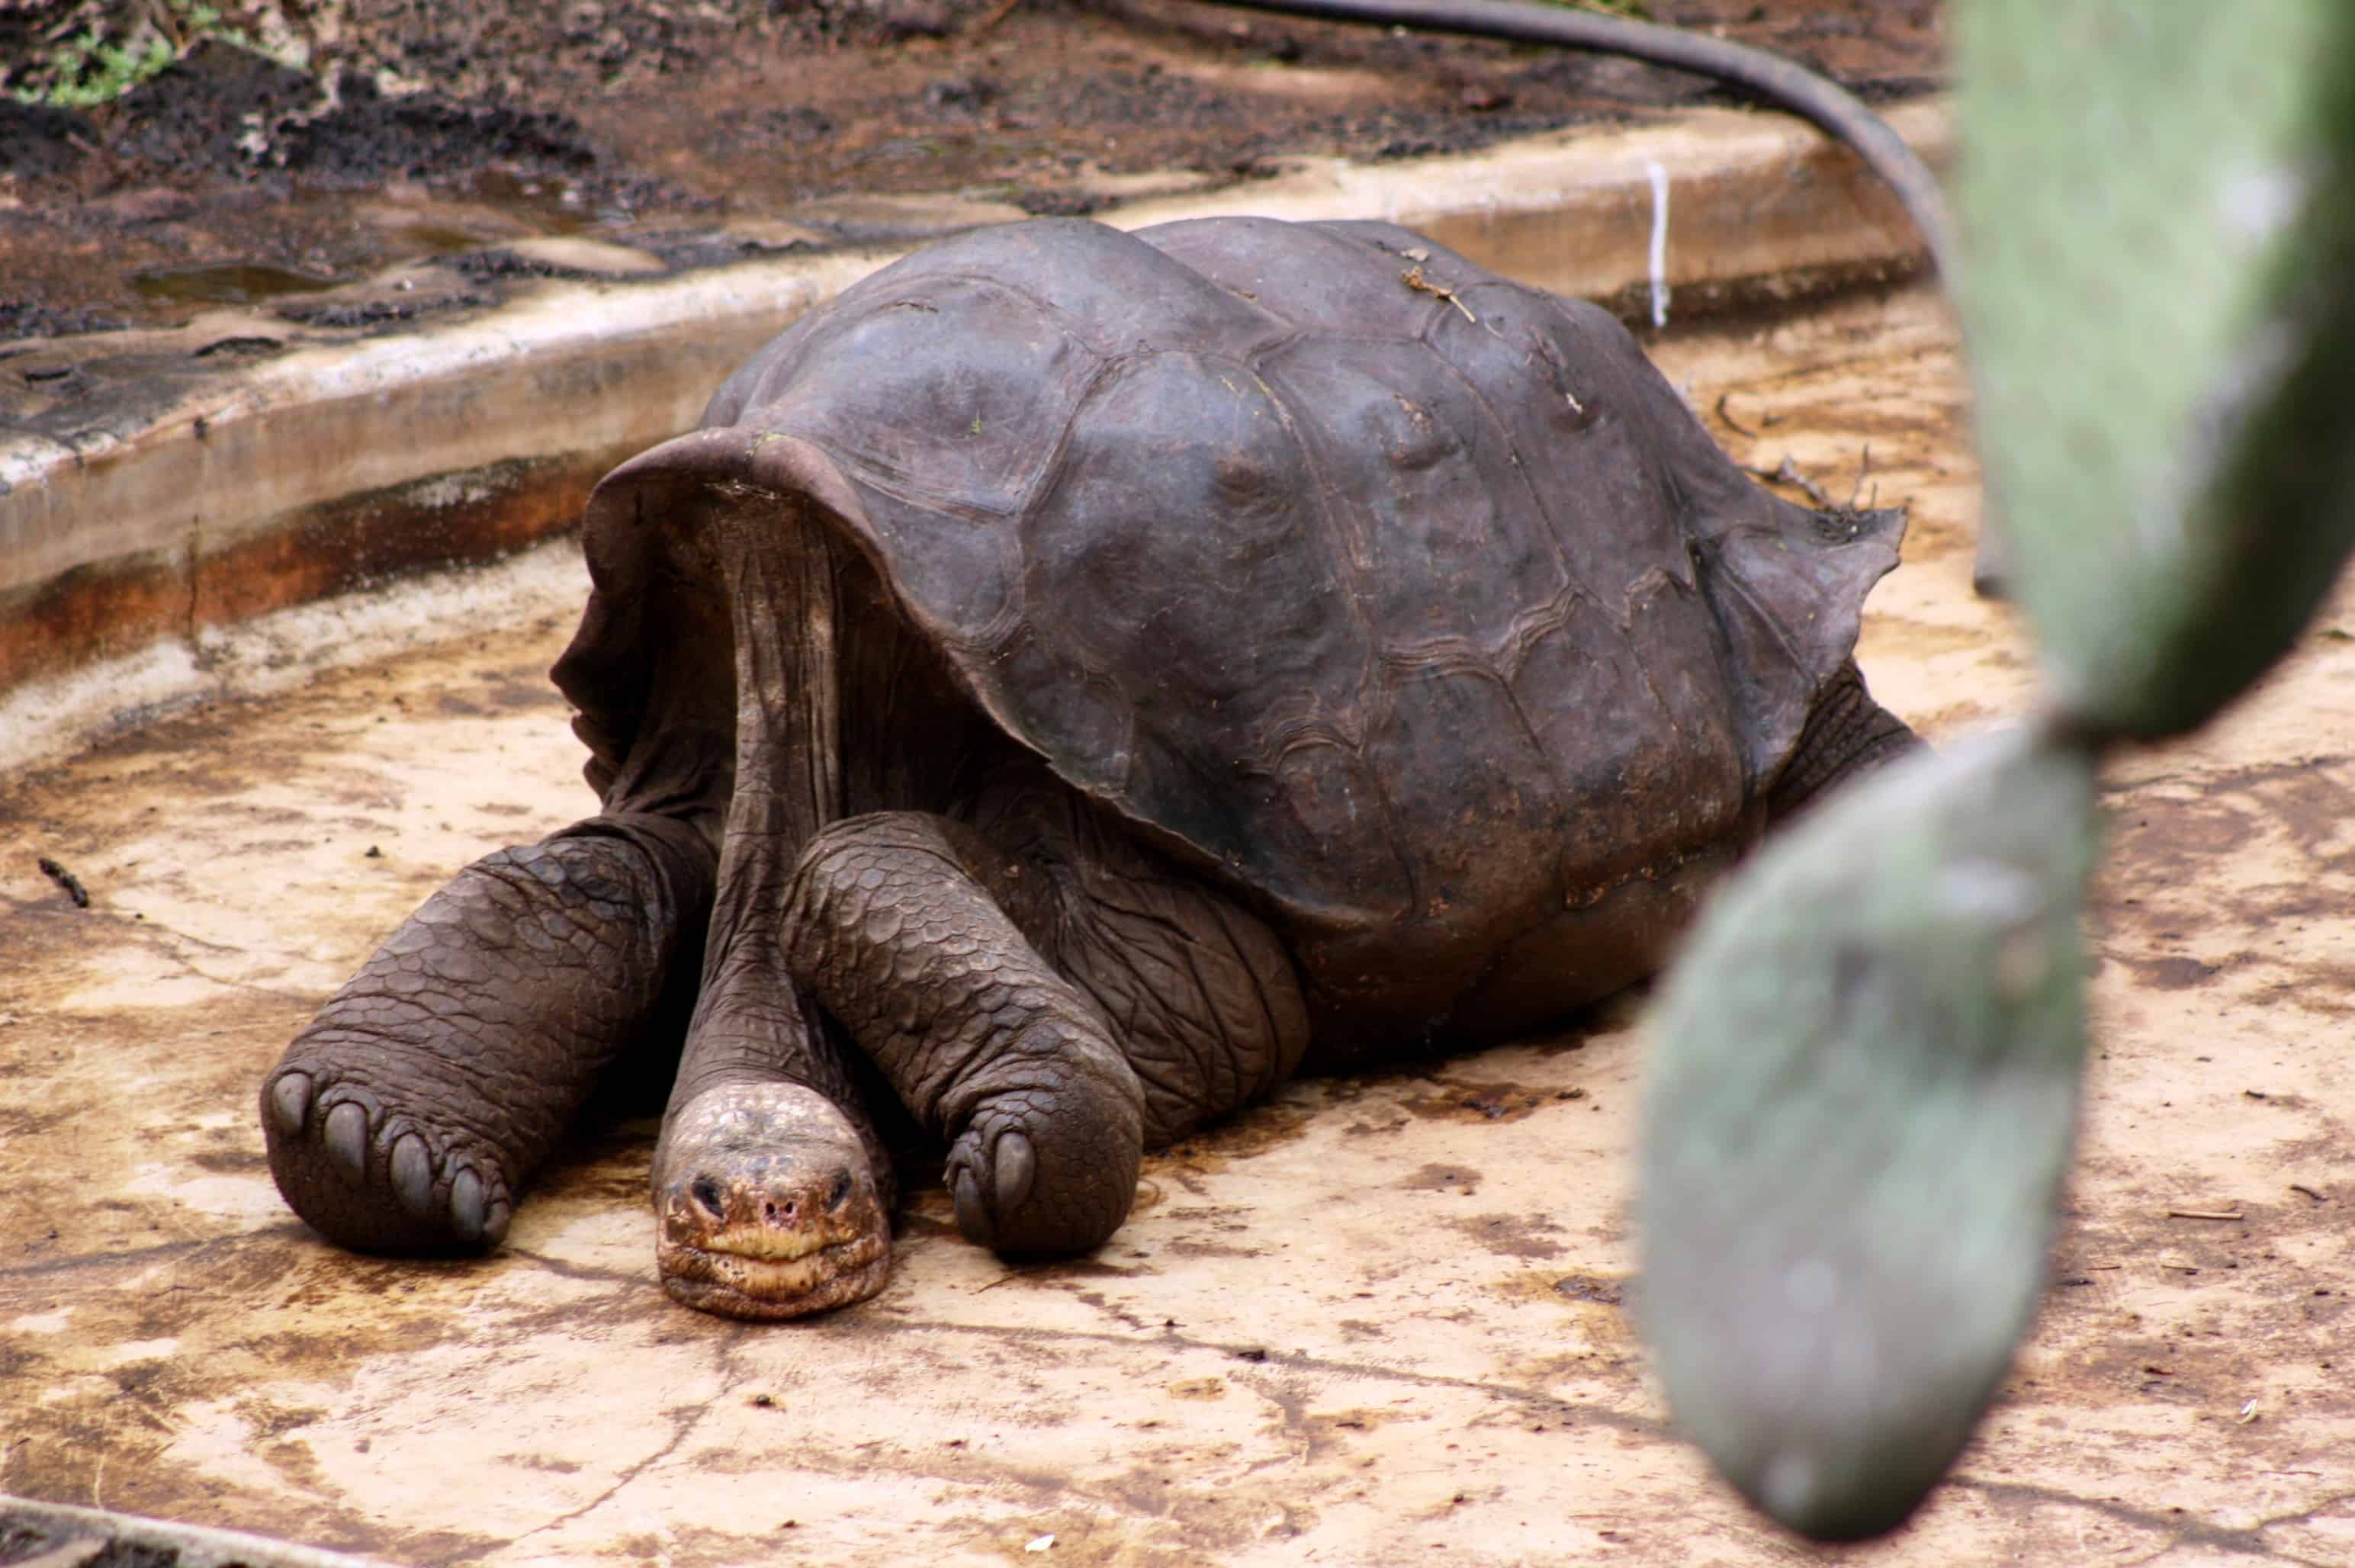 Lonesome George, last of the Pinta Island tortoises in the Galapagos